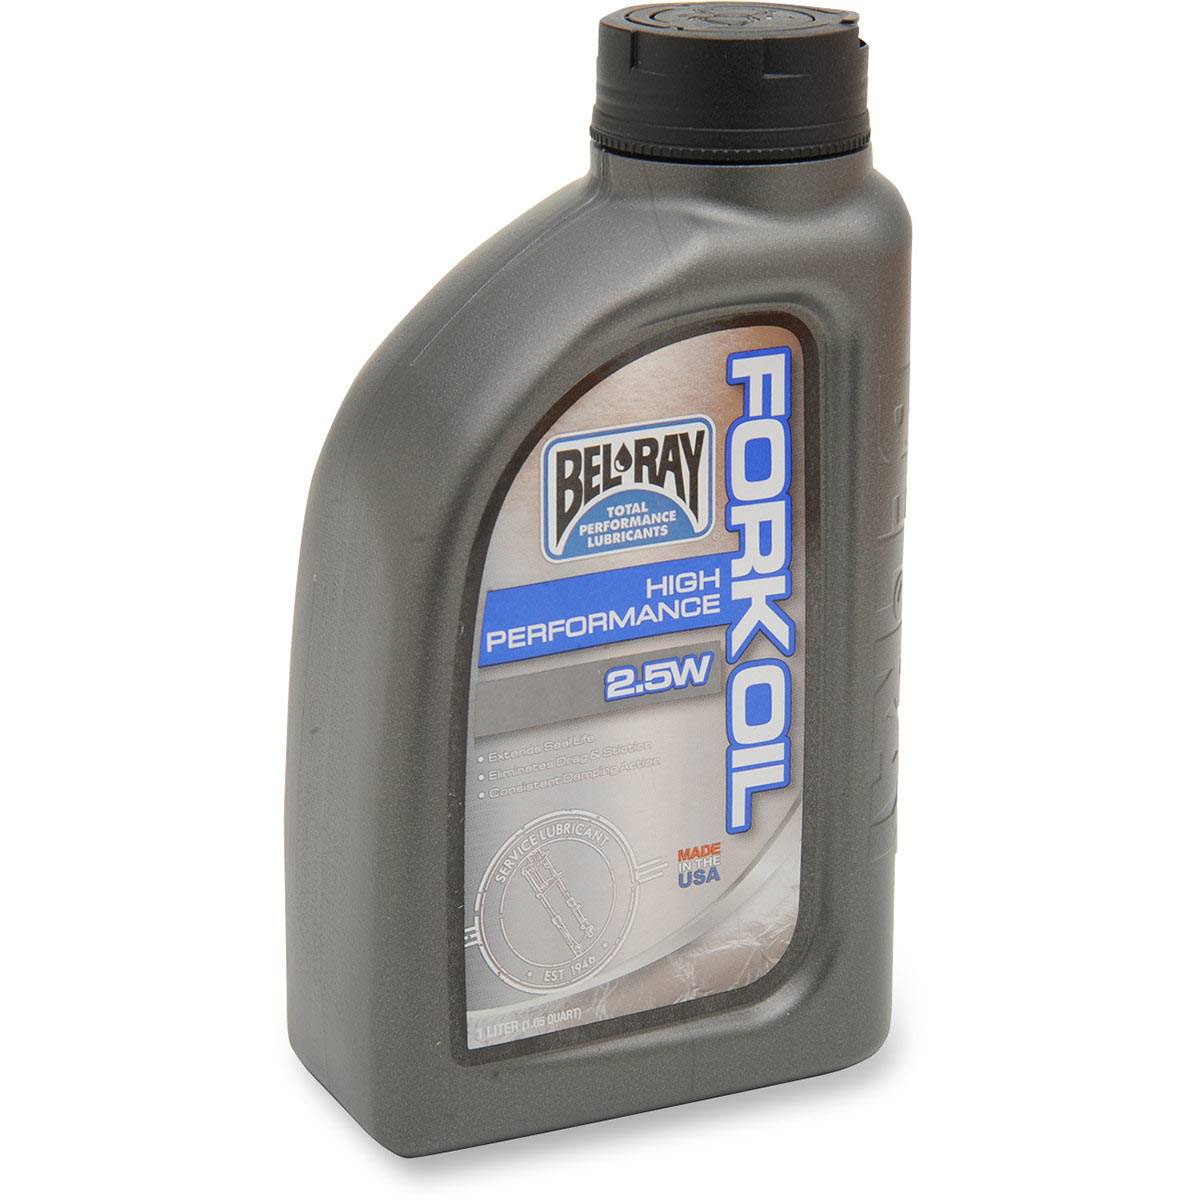 Bel-Ray High Performance Fork Oil 2.5W